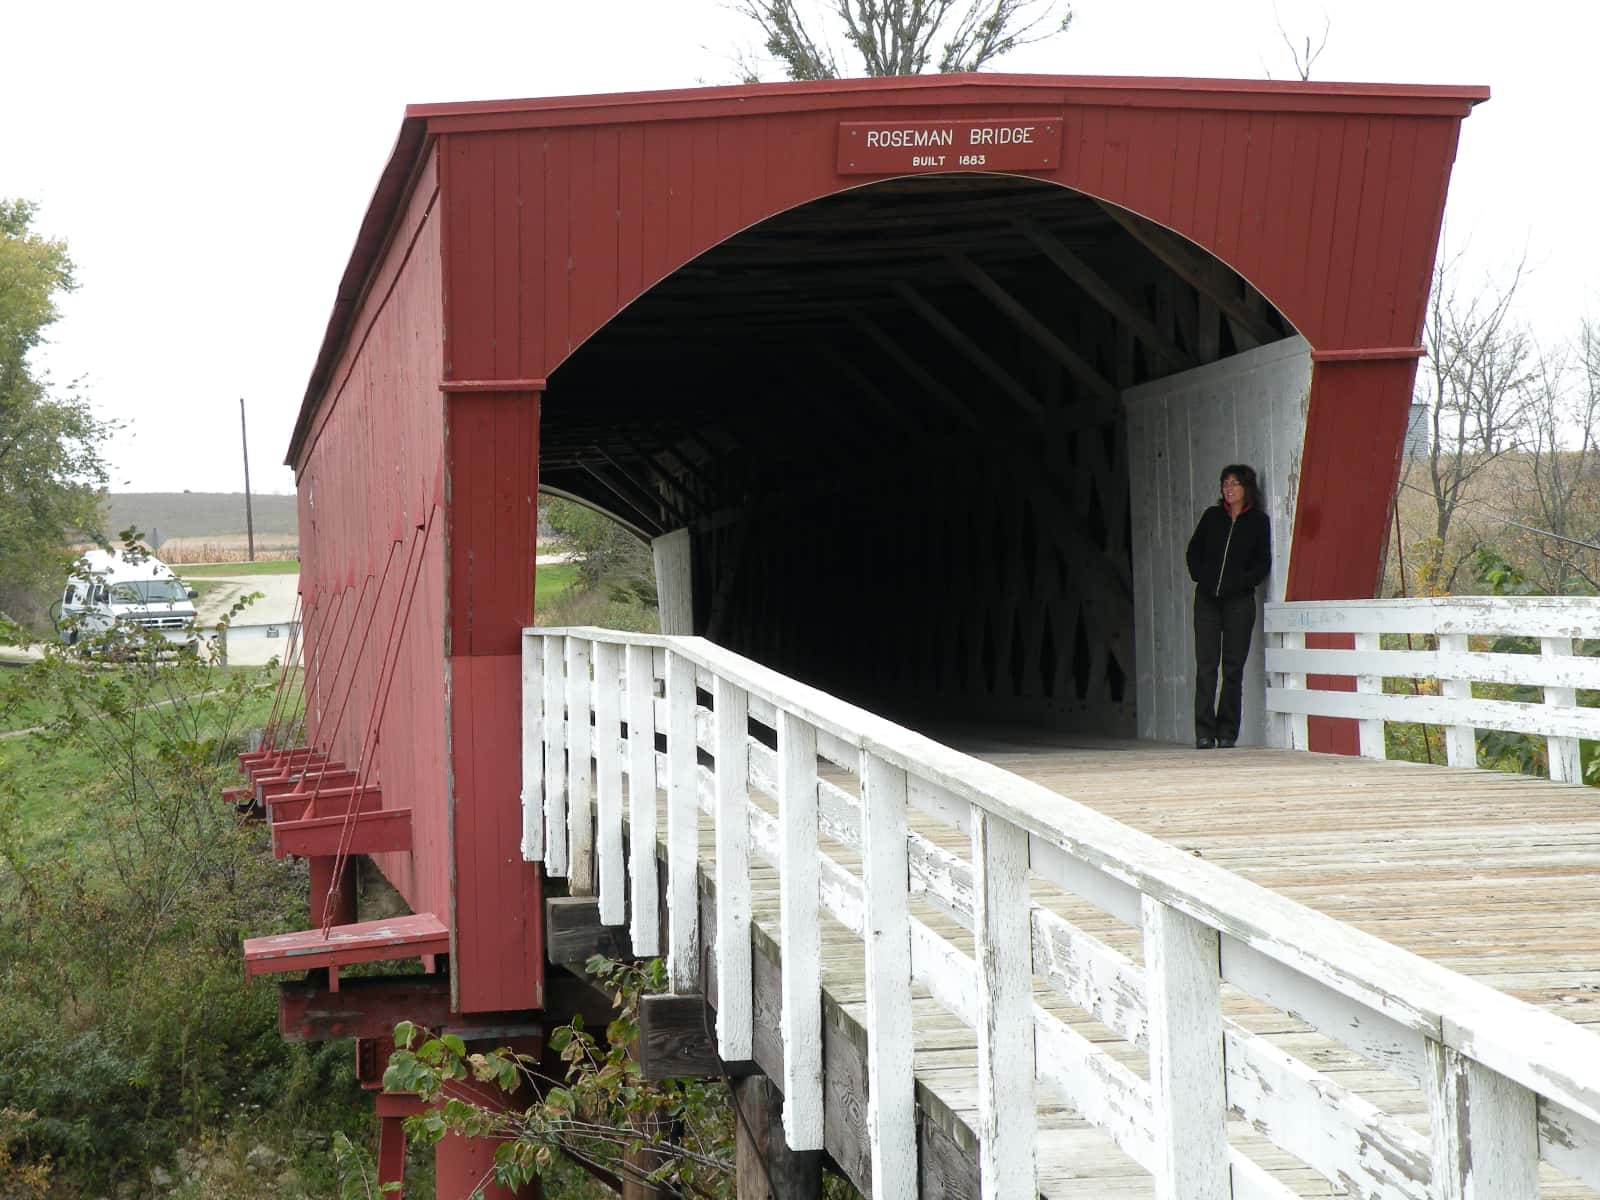 Woman standing underneath roof of red covered bridge